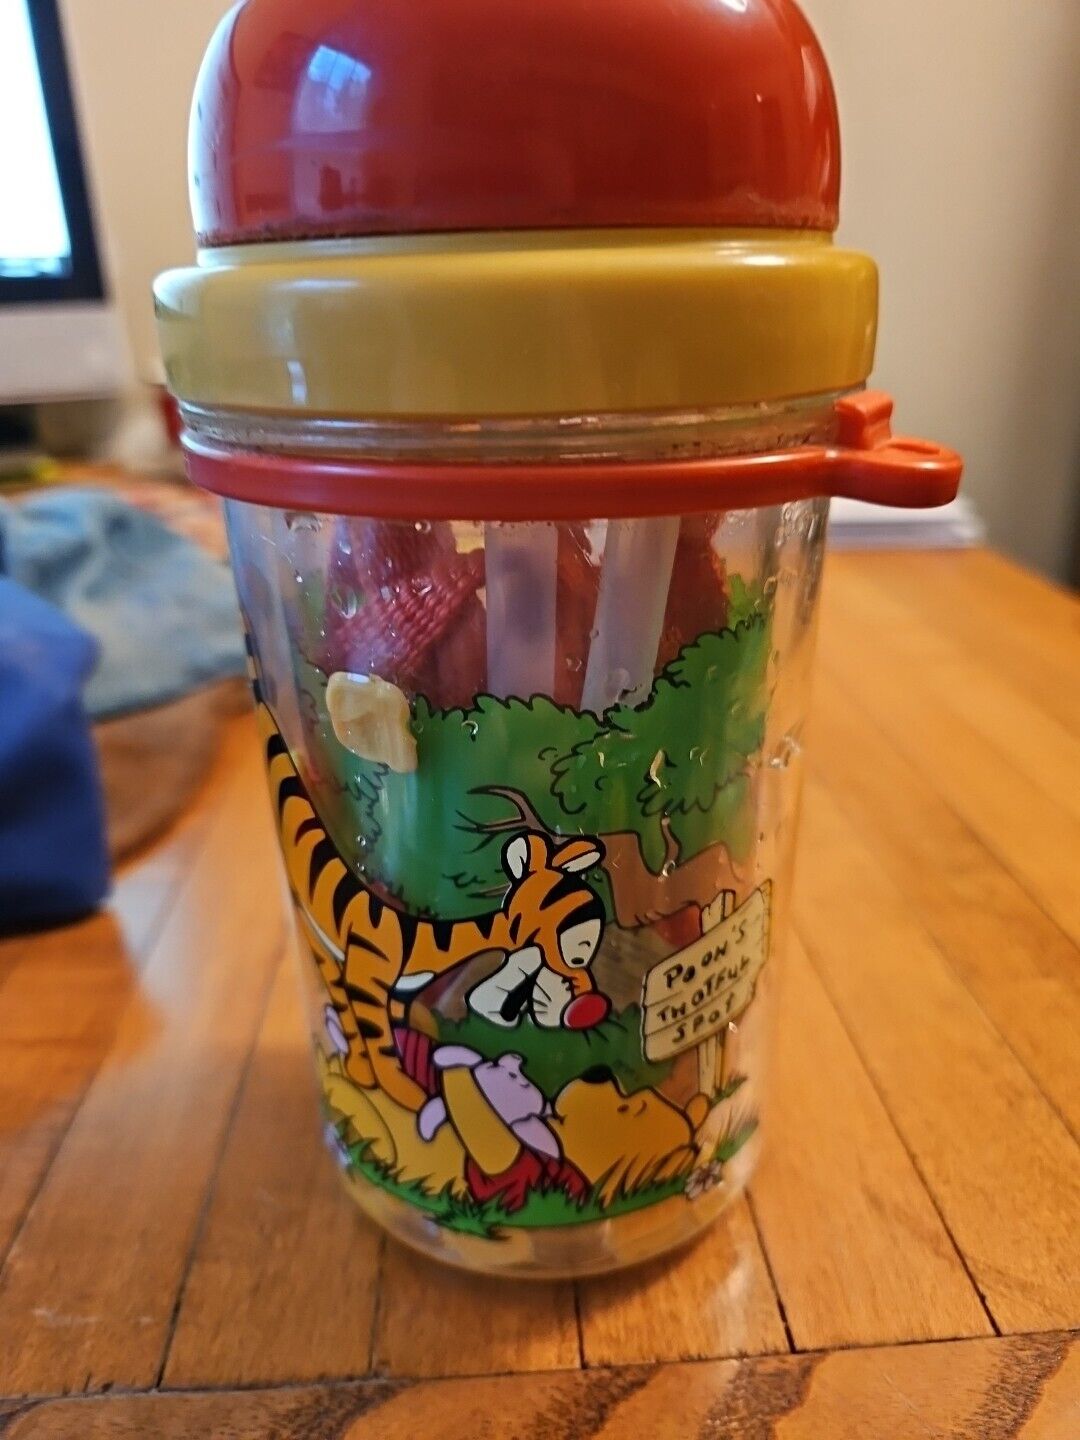 NWT Rare Vintage 90s Winnie the Pooh Turn & Learn Cup w/ Carrying Strap